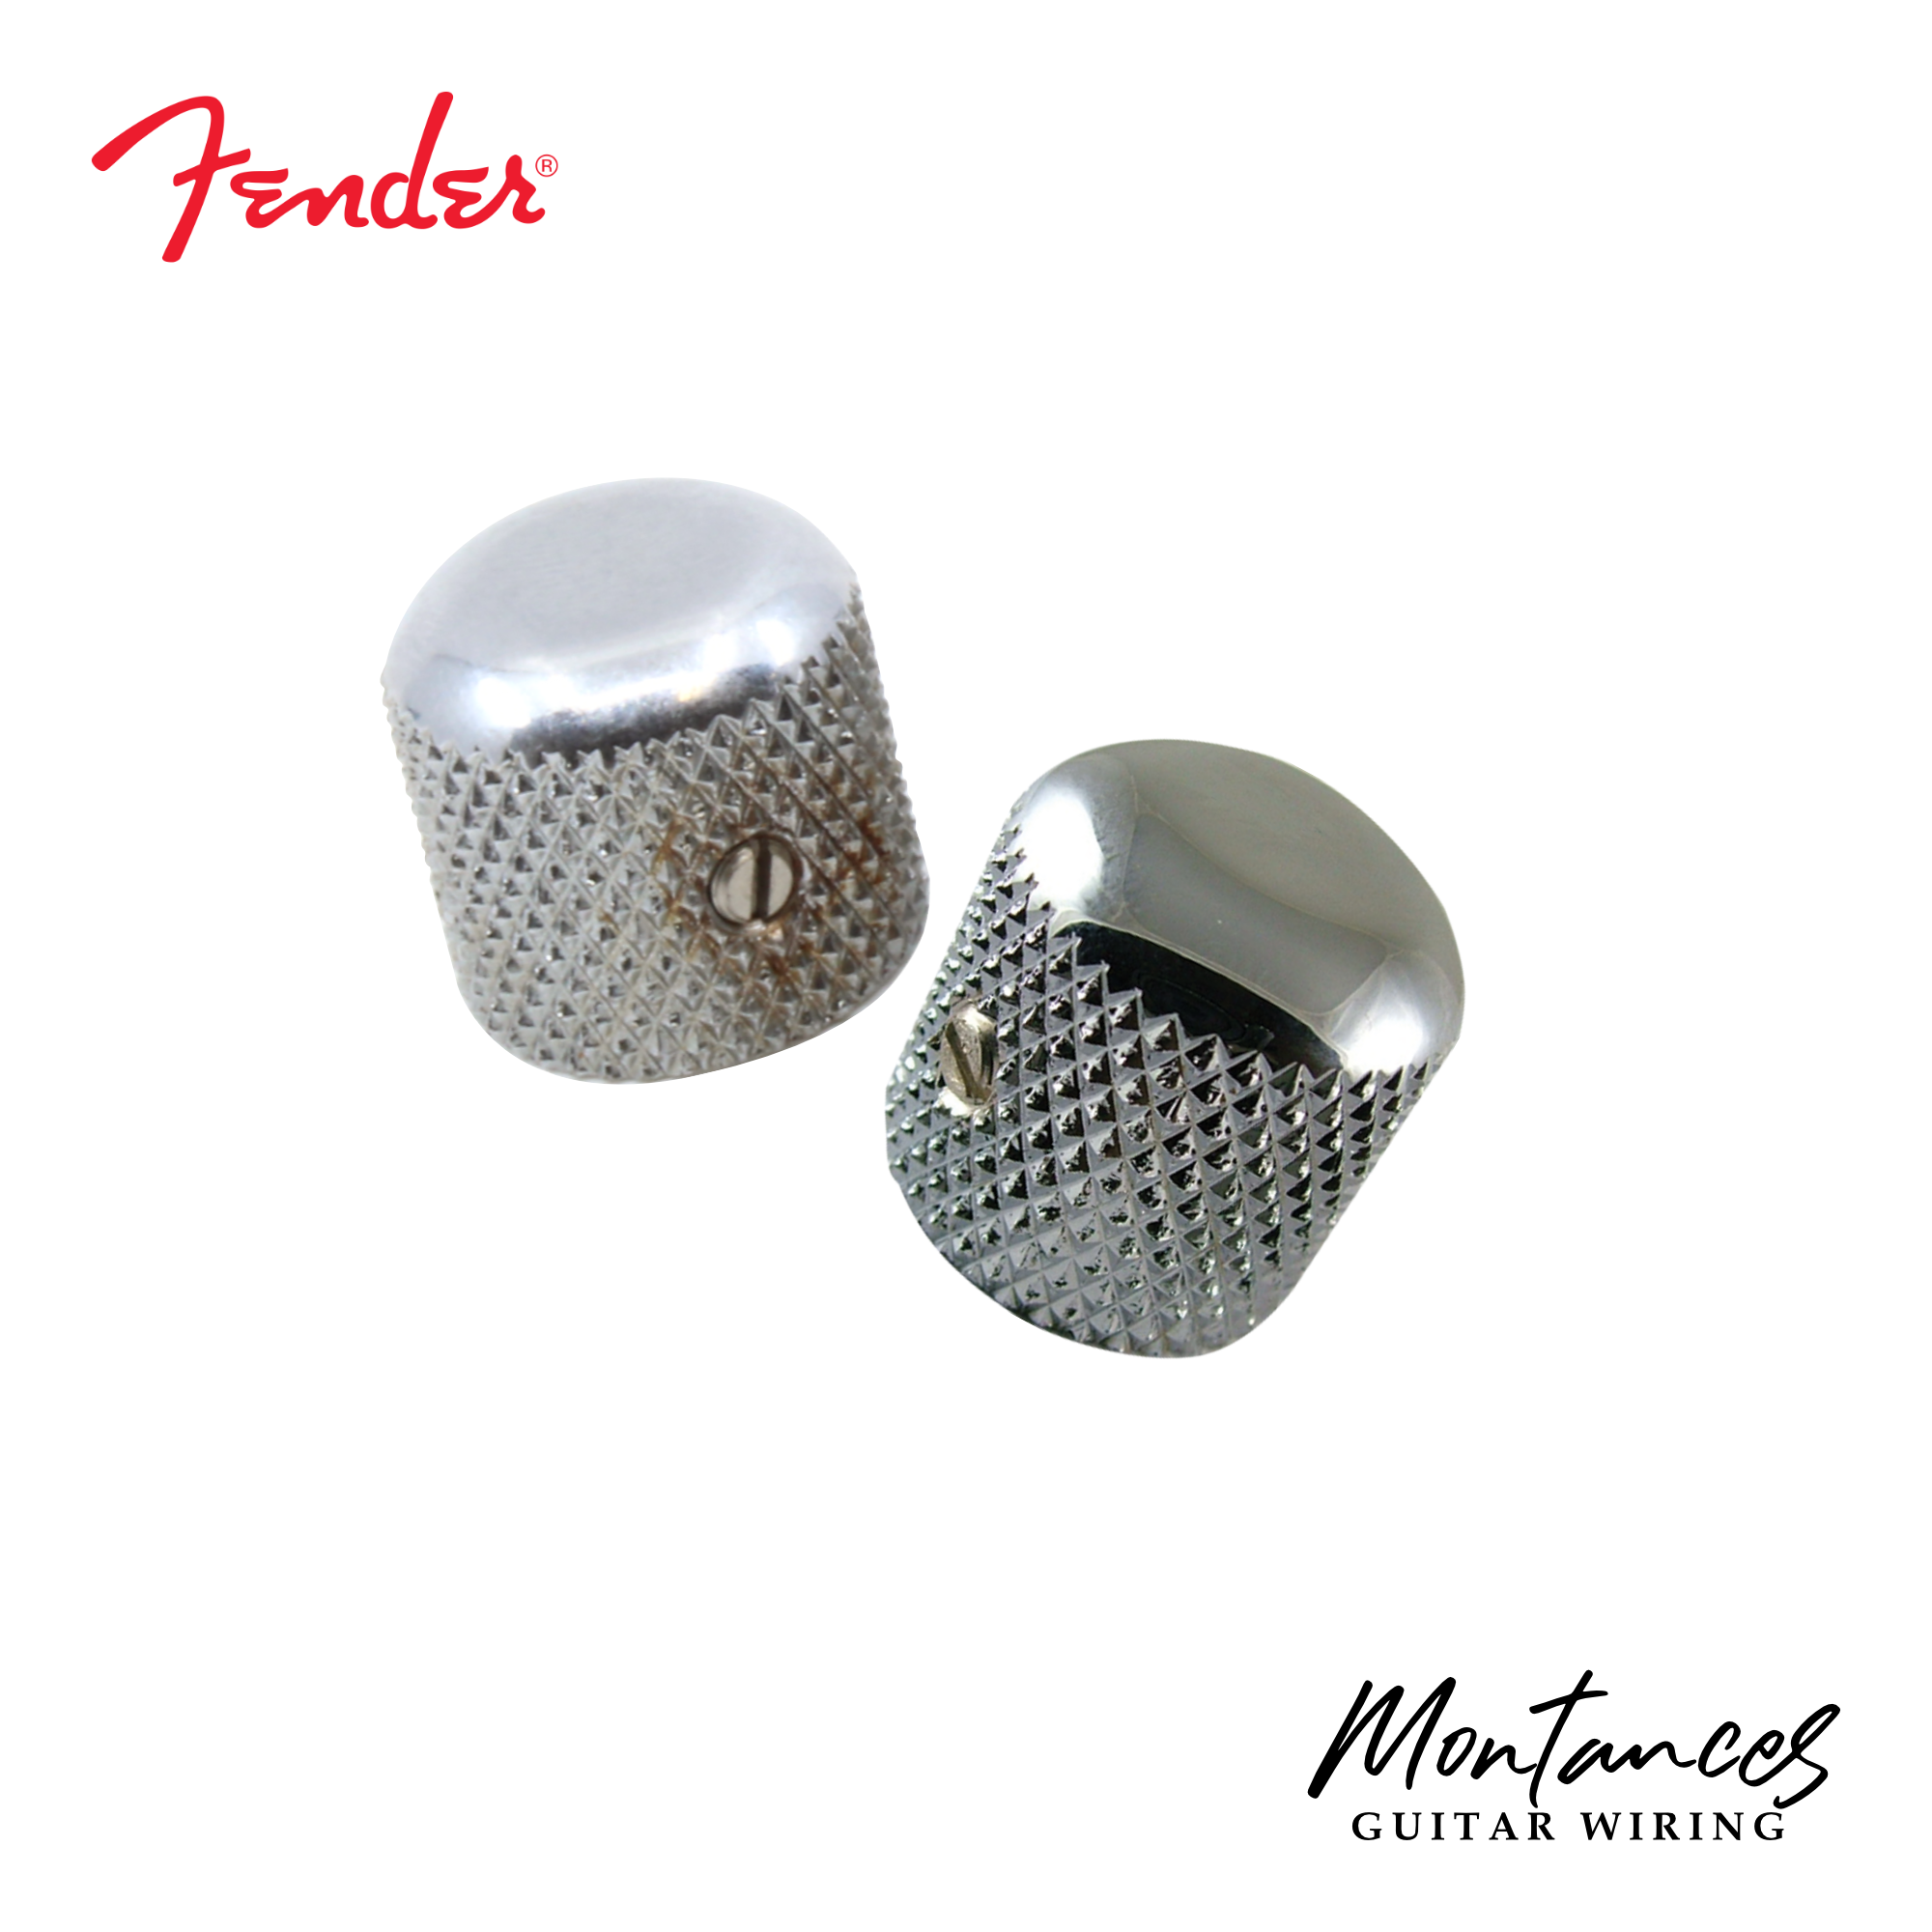 Knobs for Fender® Telecaster, Dome style, with set screw (2pcs)